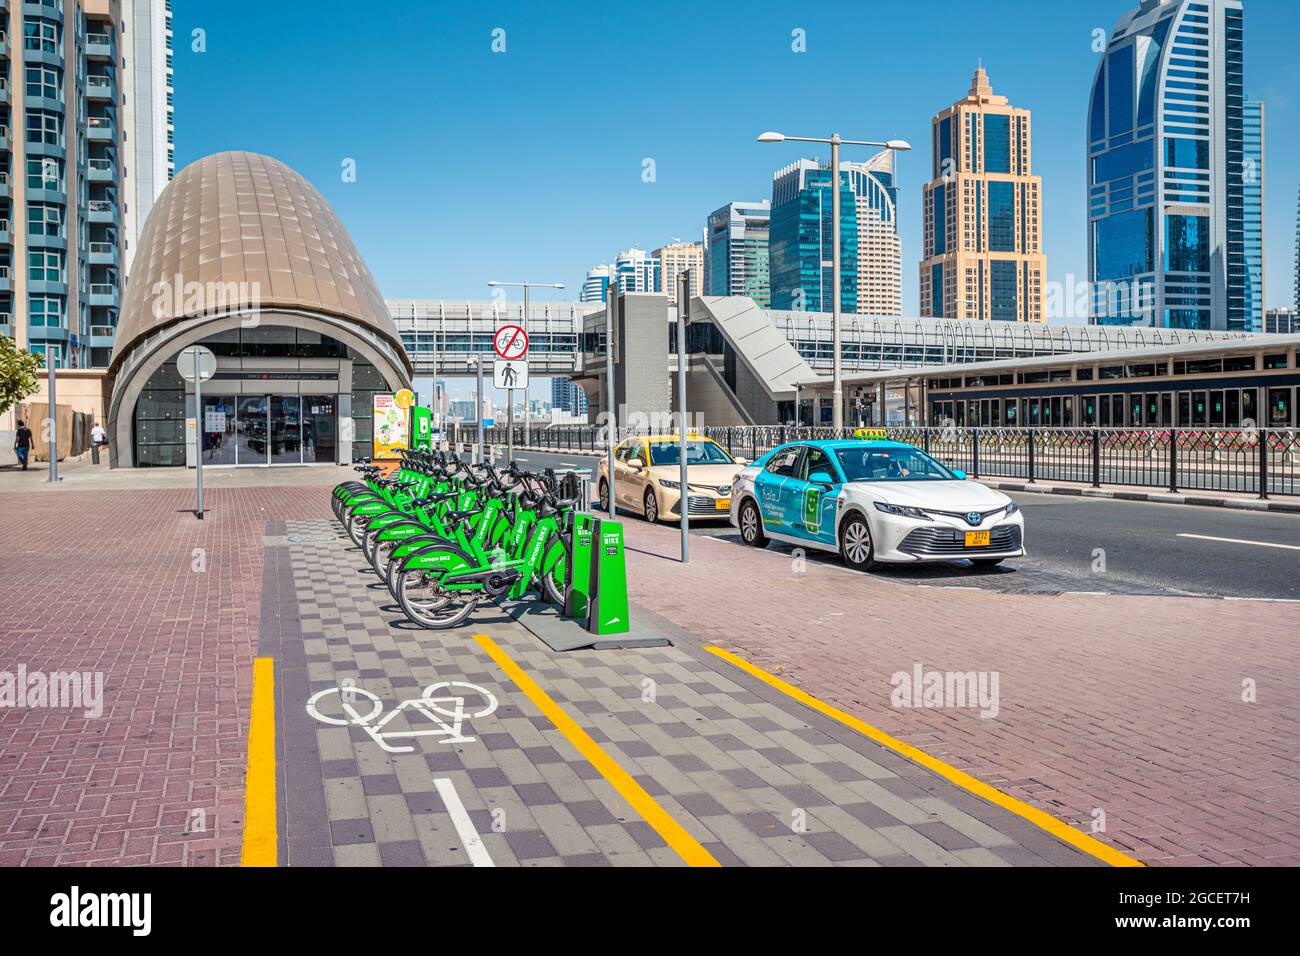 23 February 2021, Dubai, UAE: Bike rental counter from Careem, metro entrance and taxi stand, as city Public transport Stock Photo